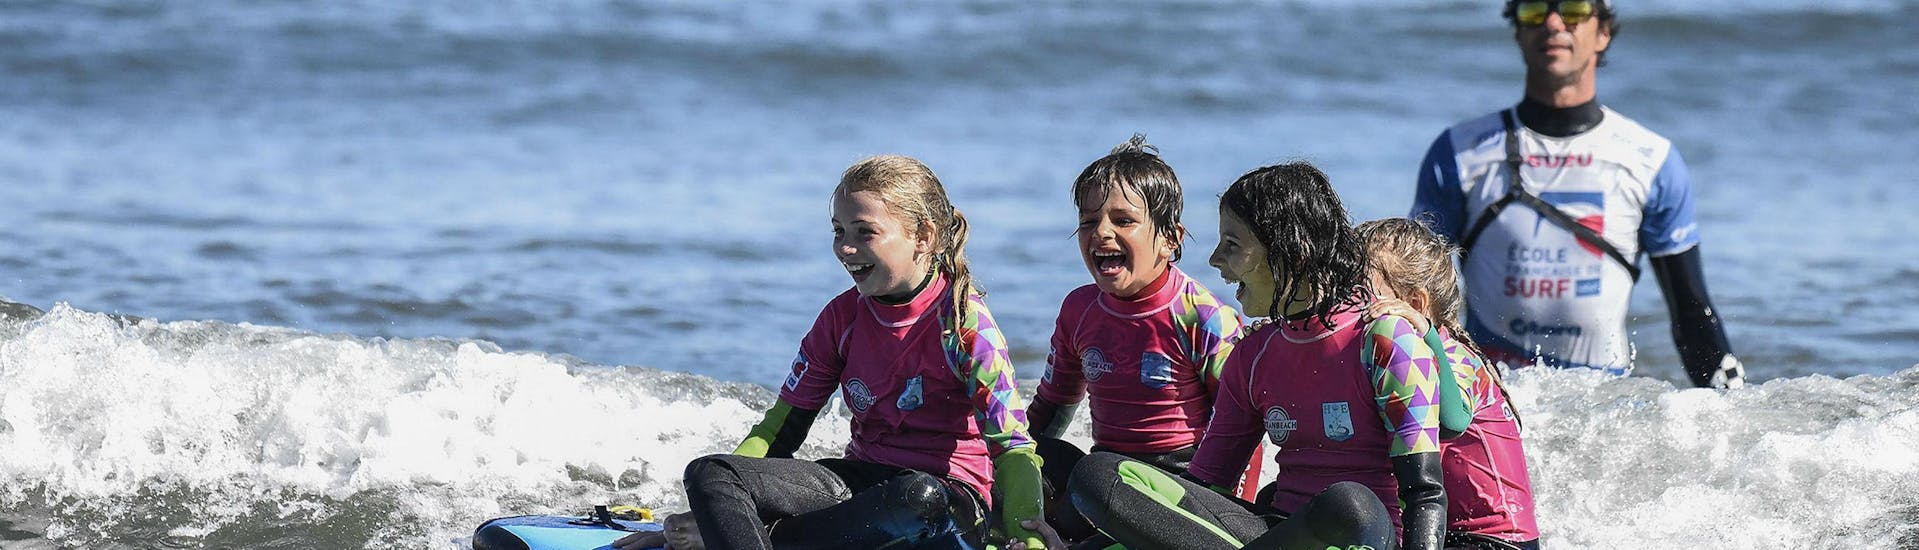 4 girls sit on a surf on the sea for a surfing lesson near their instructor of ocean beach in Hendaye.